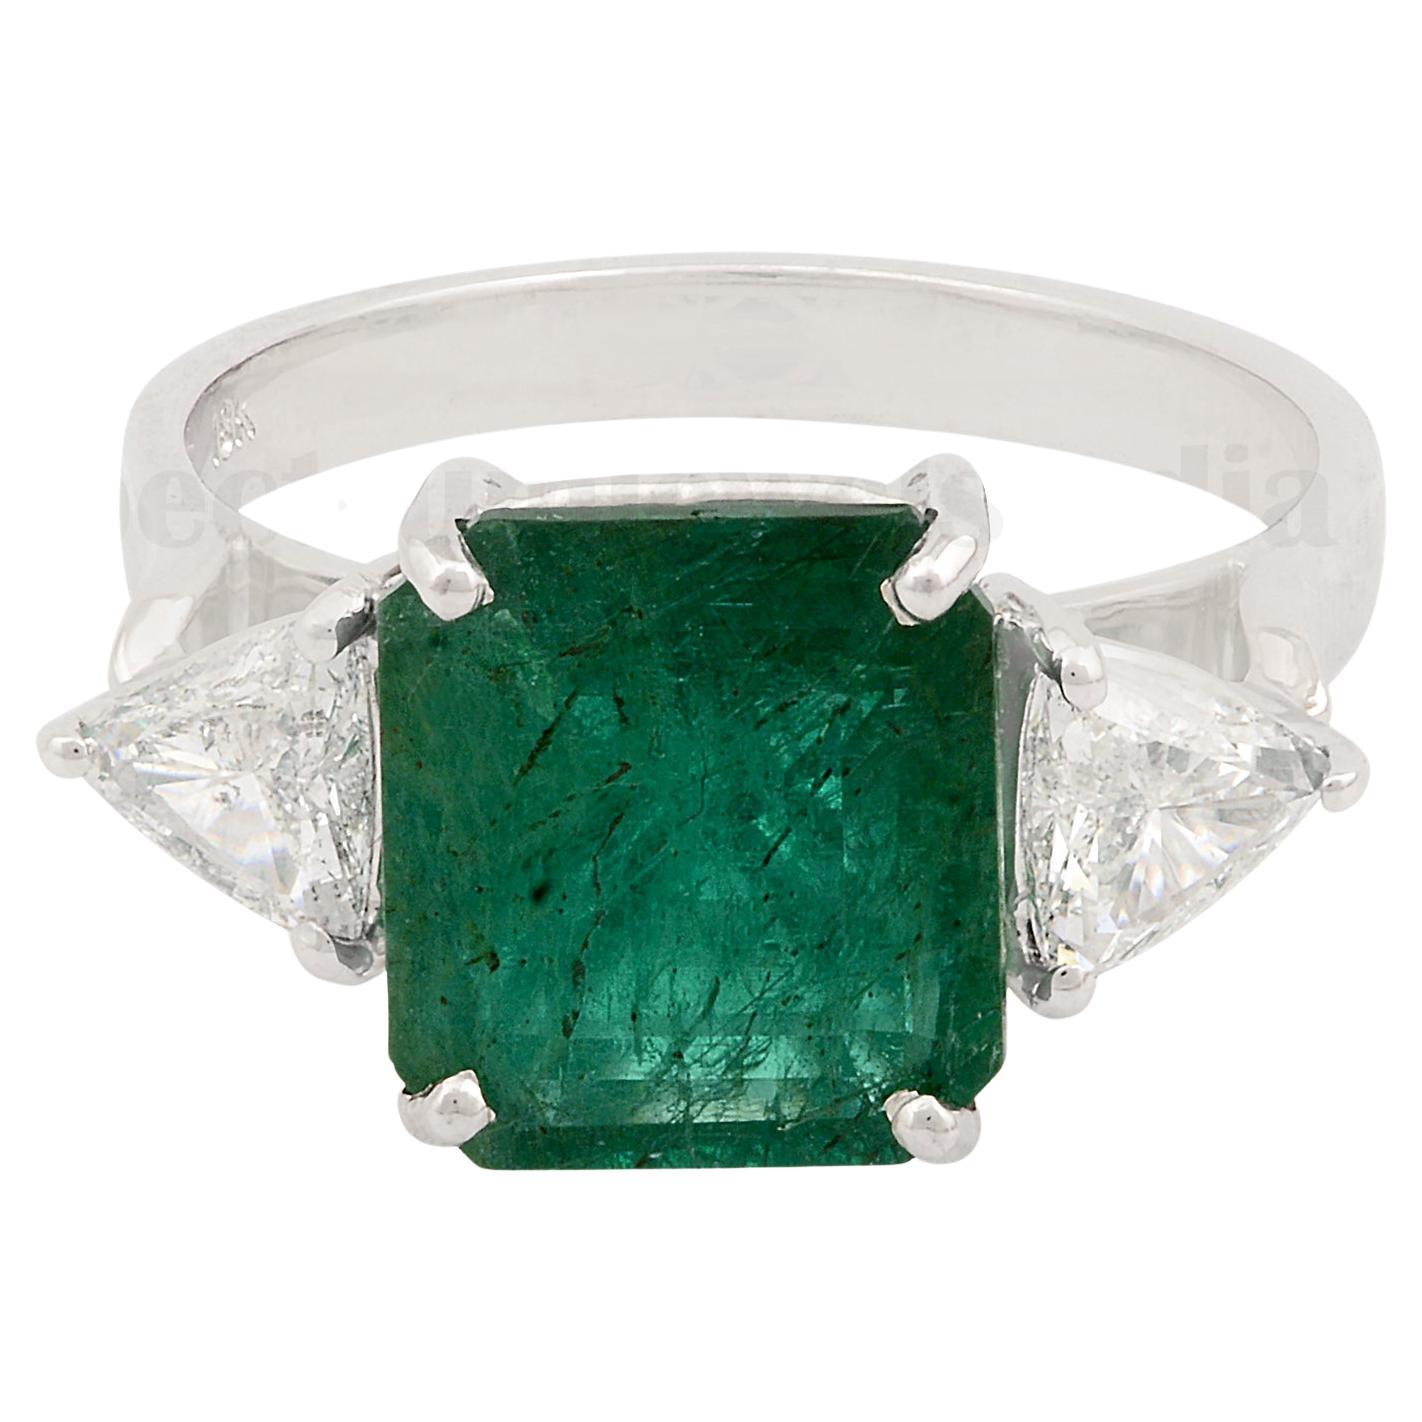 Natural Emerald Gemstone Cocktail Ring Pear Diamond Solid 18k White Gold Jewelry